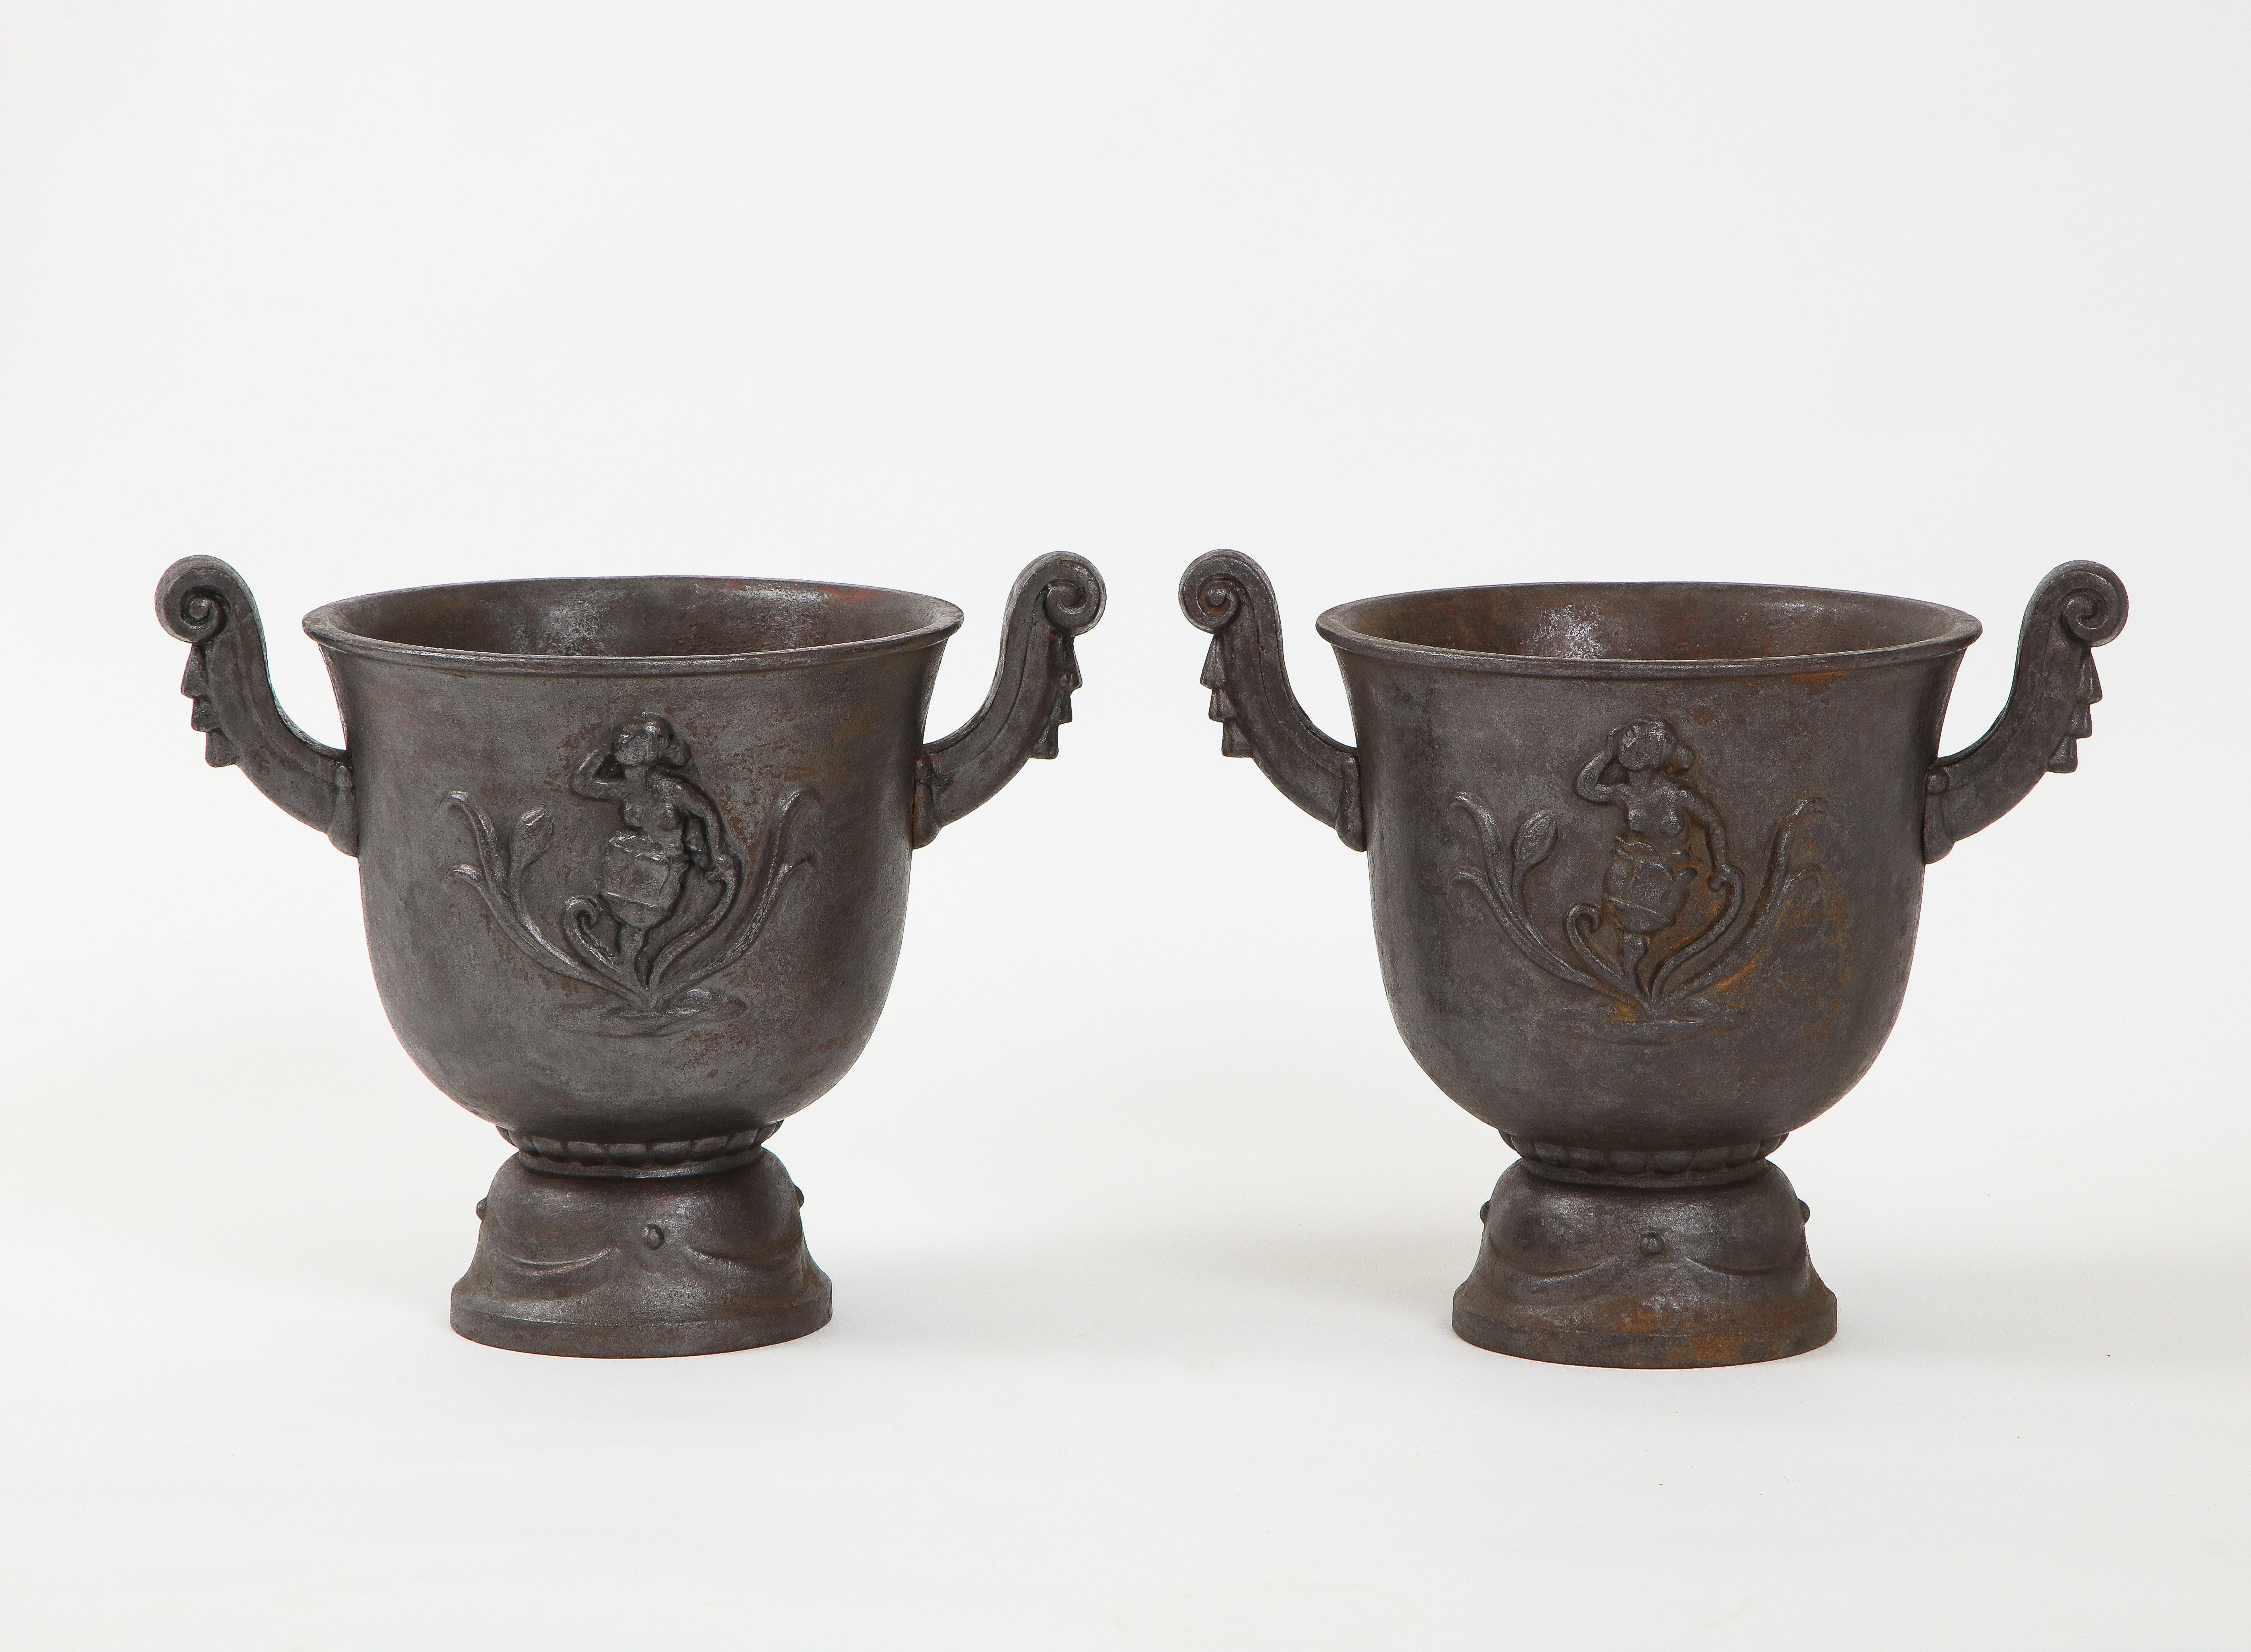 A pair of cast iron jardenière, “faunurna” designed by Ivan Johnsson (Sweden 1885-1970) and produced by Näfveqvarn foundry. Cast with classical motifs and figures. Wonderful patina. diam. base 10in. Näfveqvarn foundry is one of the oldest foundries